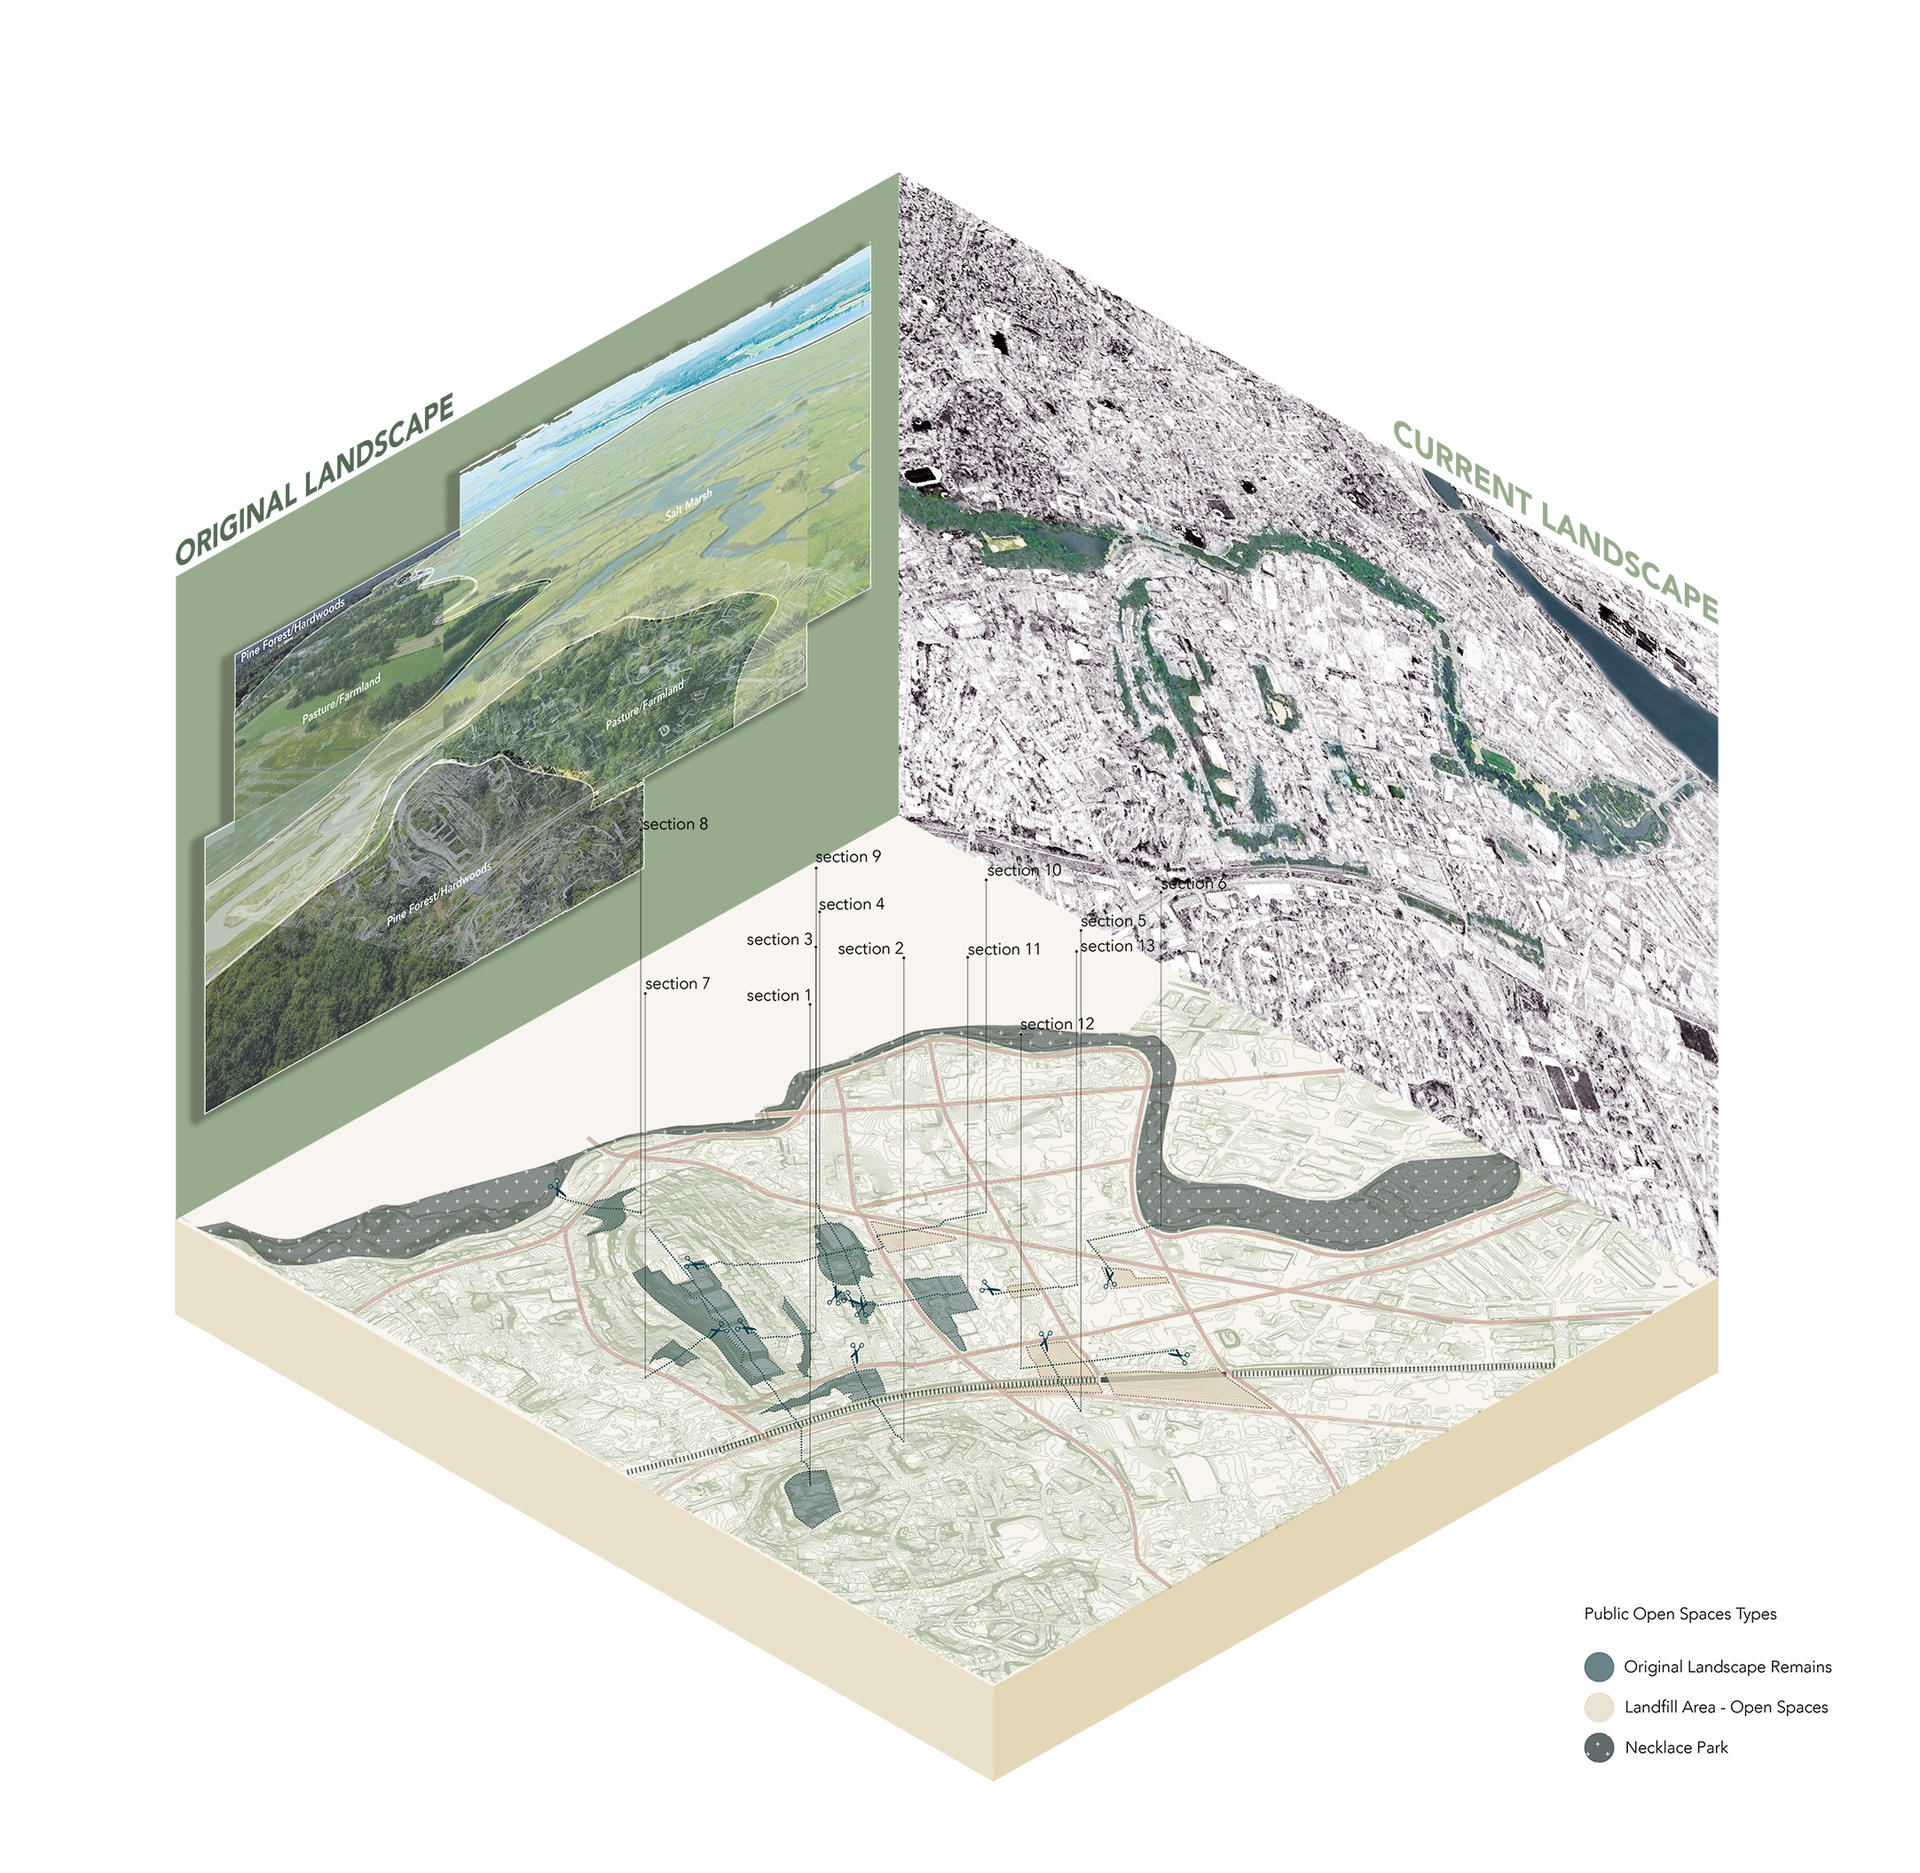  Research on the ecological history of the Boston area proves that Mission Hill used to be an ecological ecotone; comparing historical maps with current maps reveals that Mission Hill still has many ecotone remnants, which form the green public spatial system of Mission Hill today.